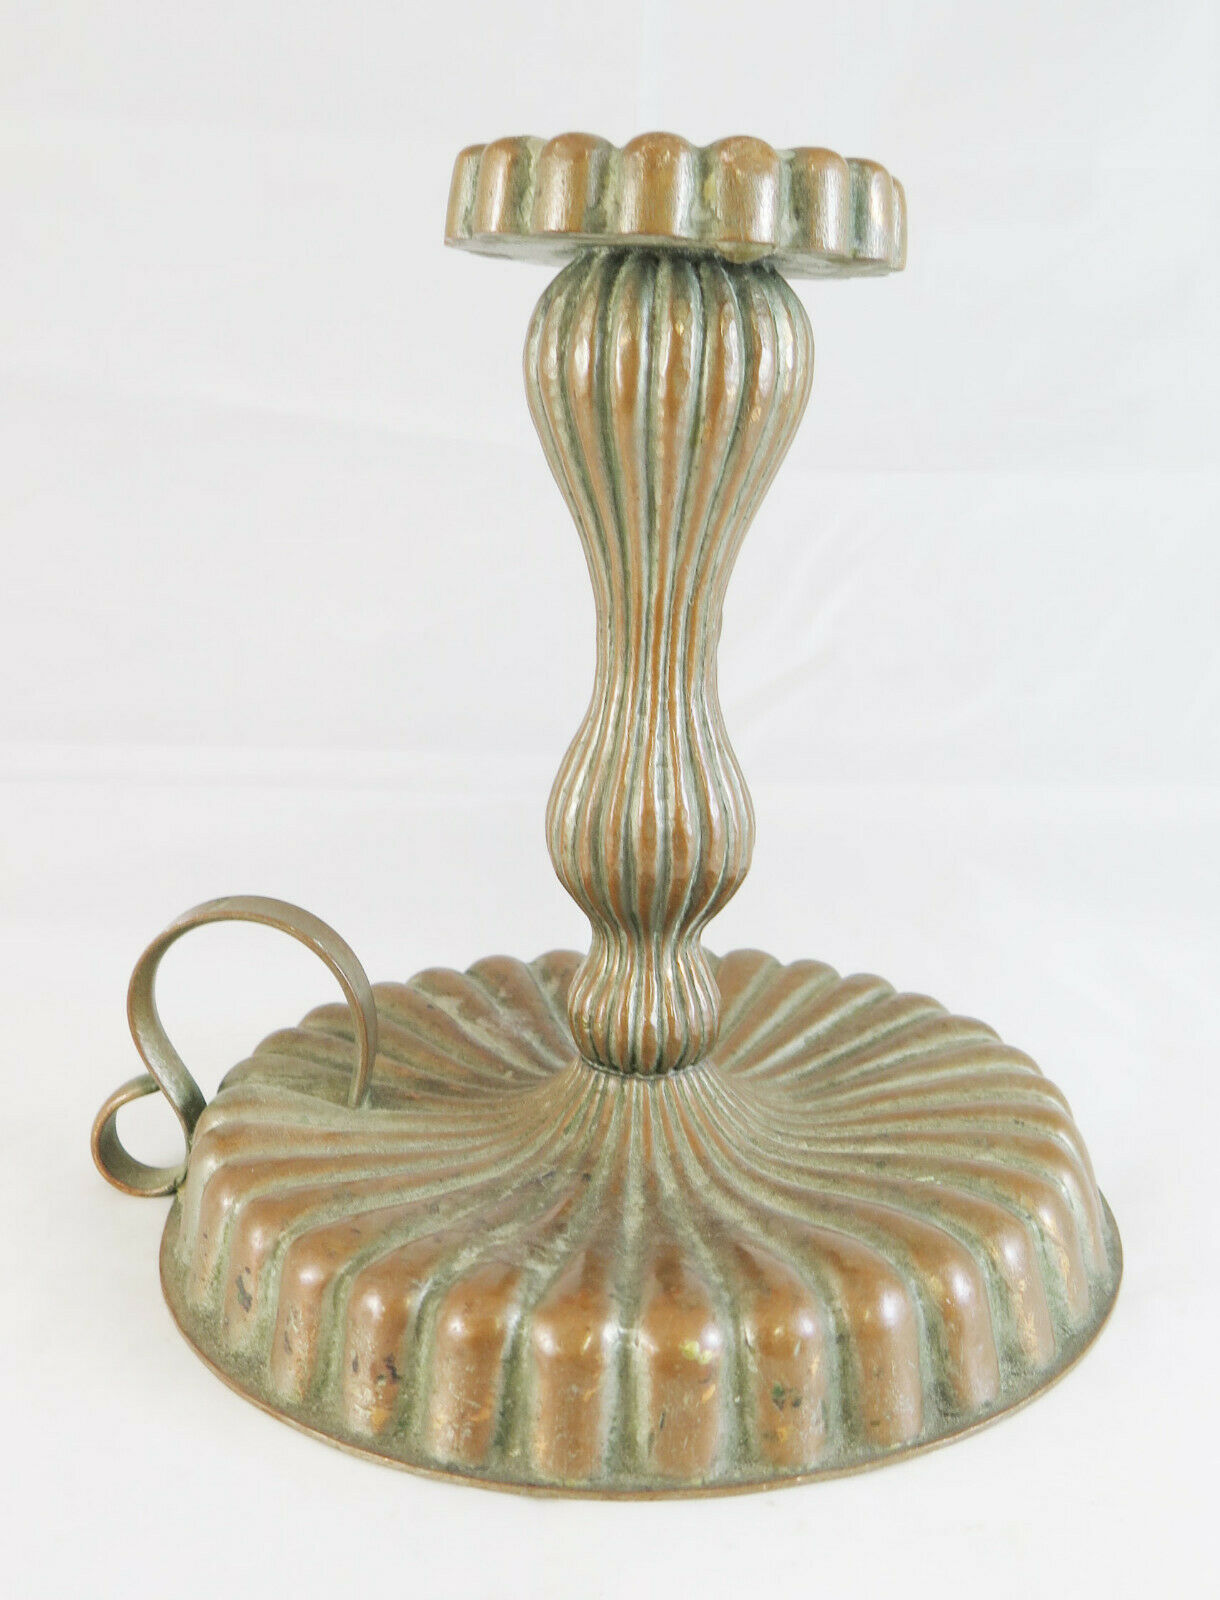 ANTIQUE METAL CANDLESTICK LATE 19TH CENTURY ANTIQUE CANDLE HOLDER G13 